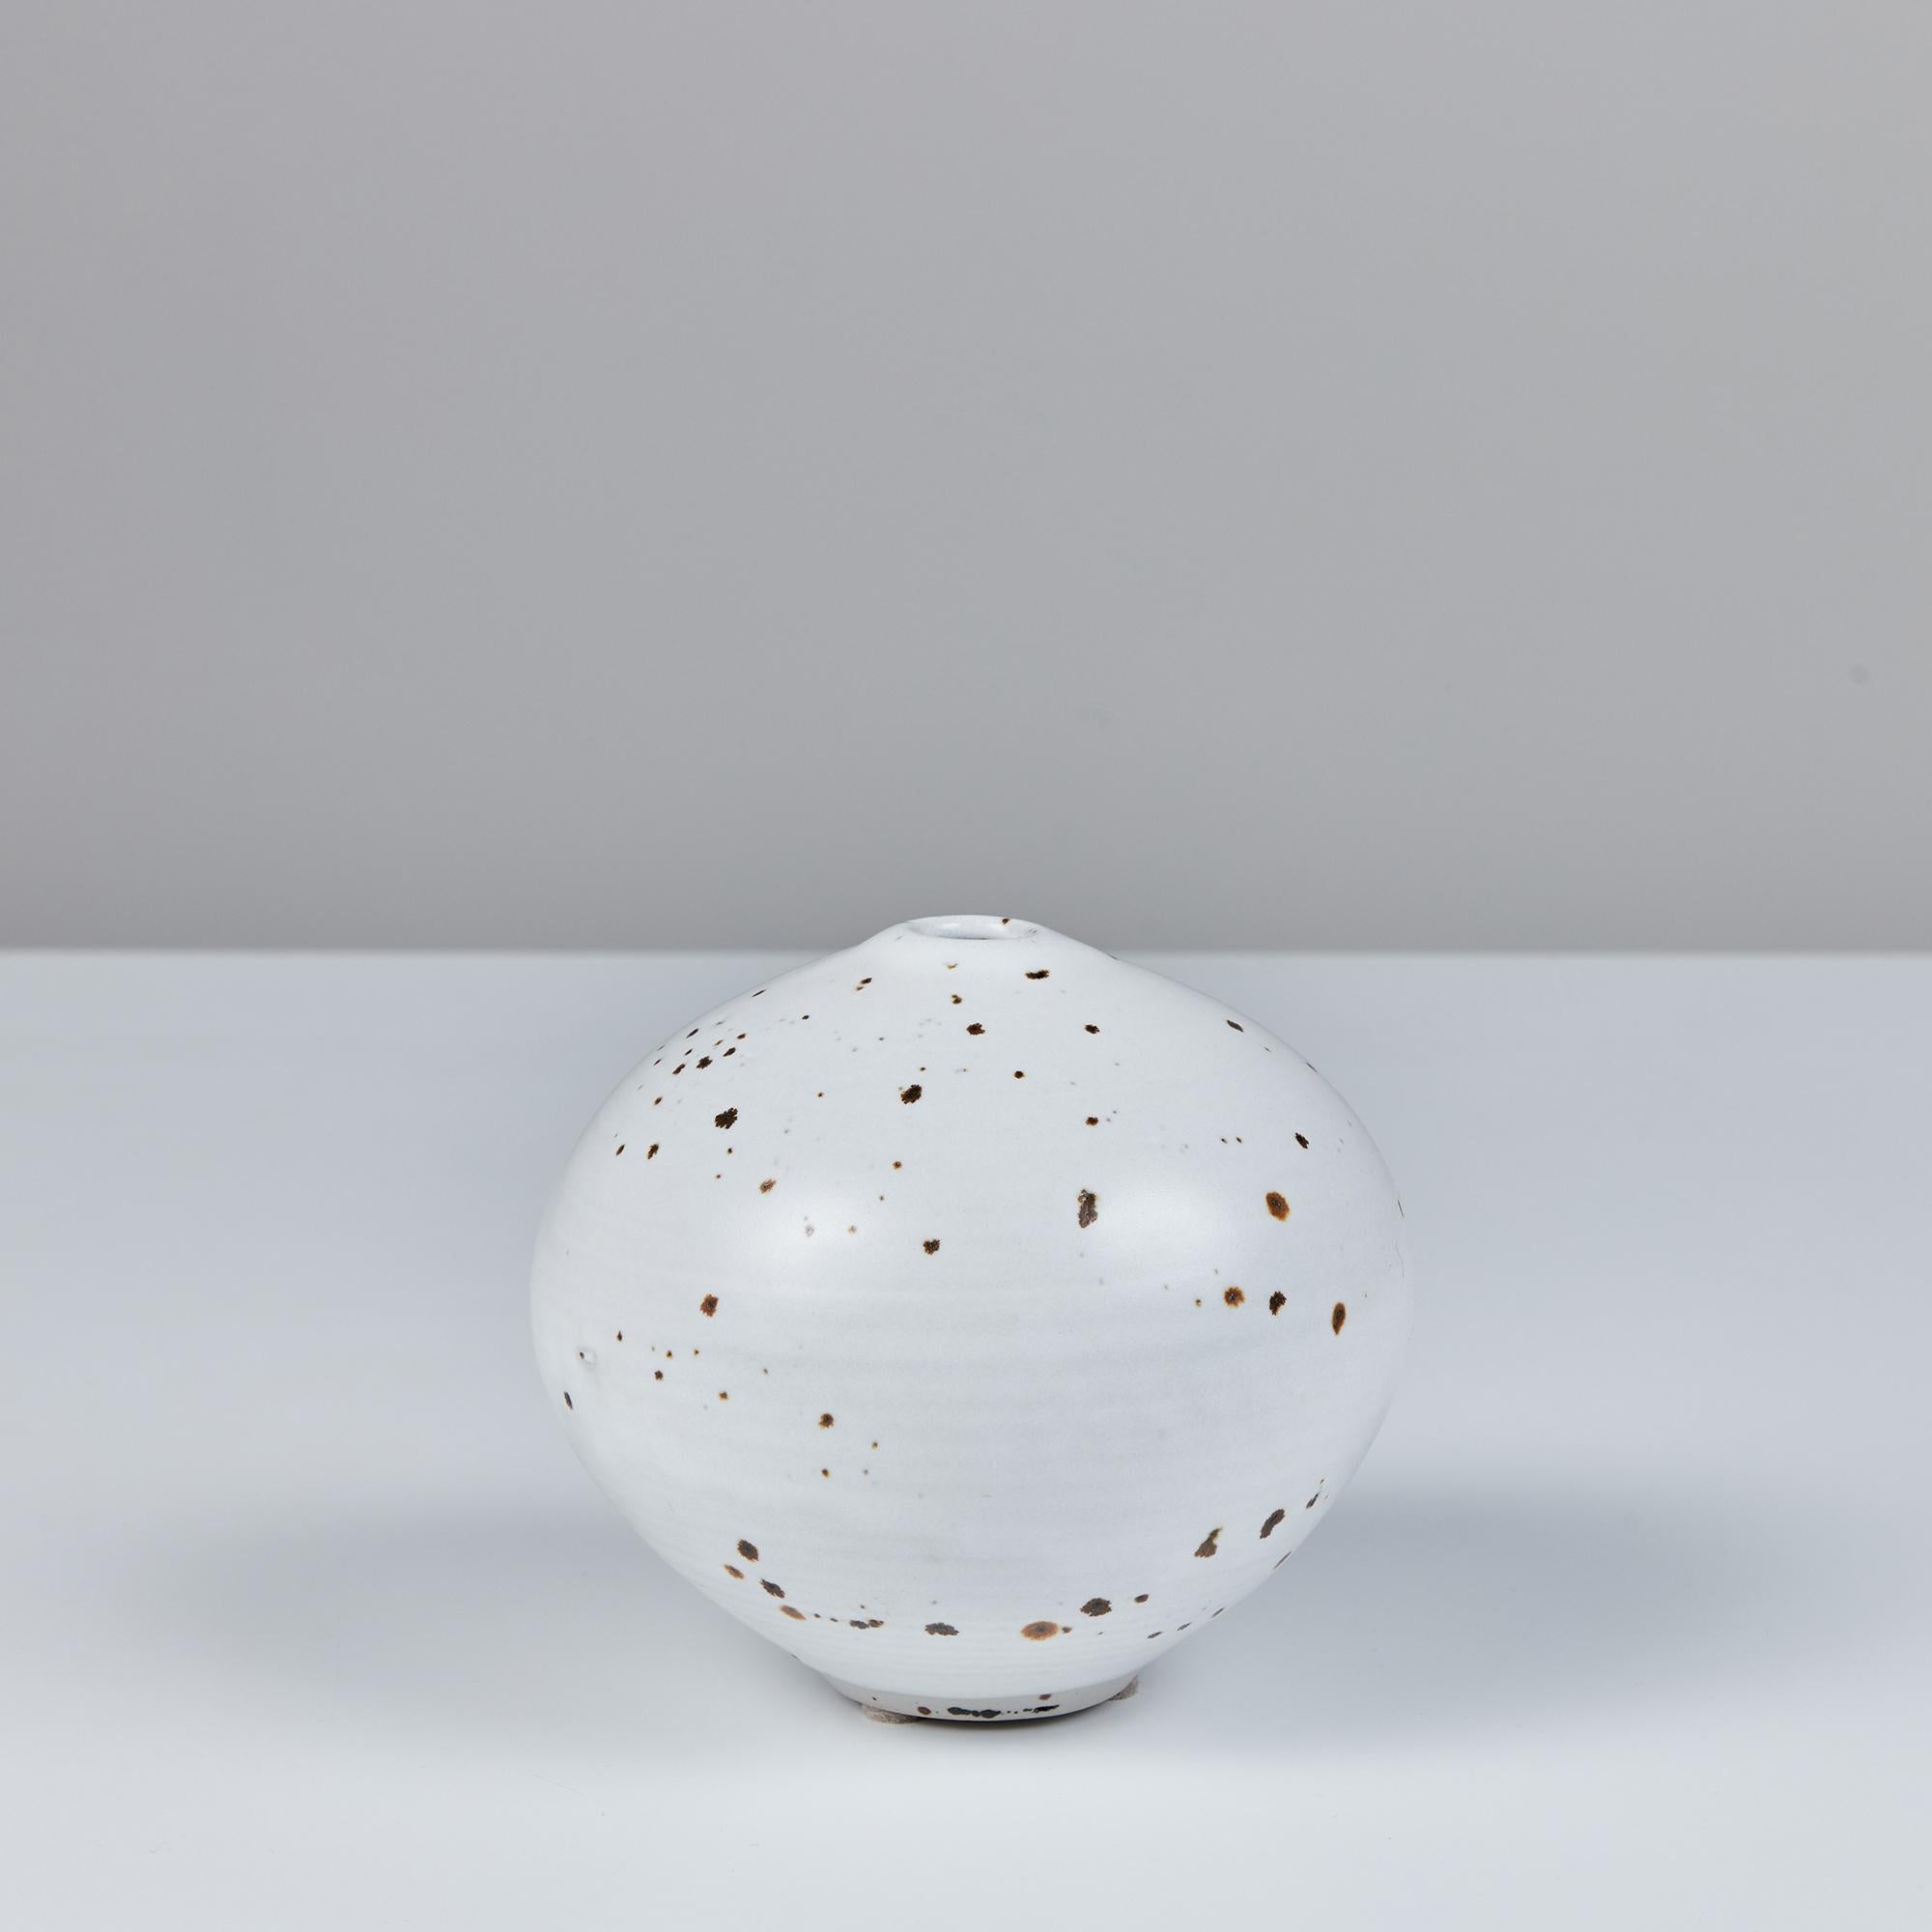 A small studio pottery vessel by significant 20th century ceramicist Otto Heino. This rounded bud vase features a white speckle glaze and ribbed texture.
Signed on the underside, “Otto ‘99.”

Dimensions
5” diameter x 4.75”